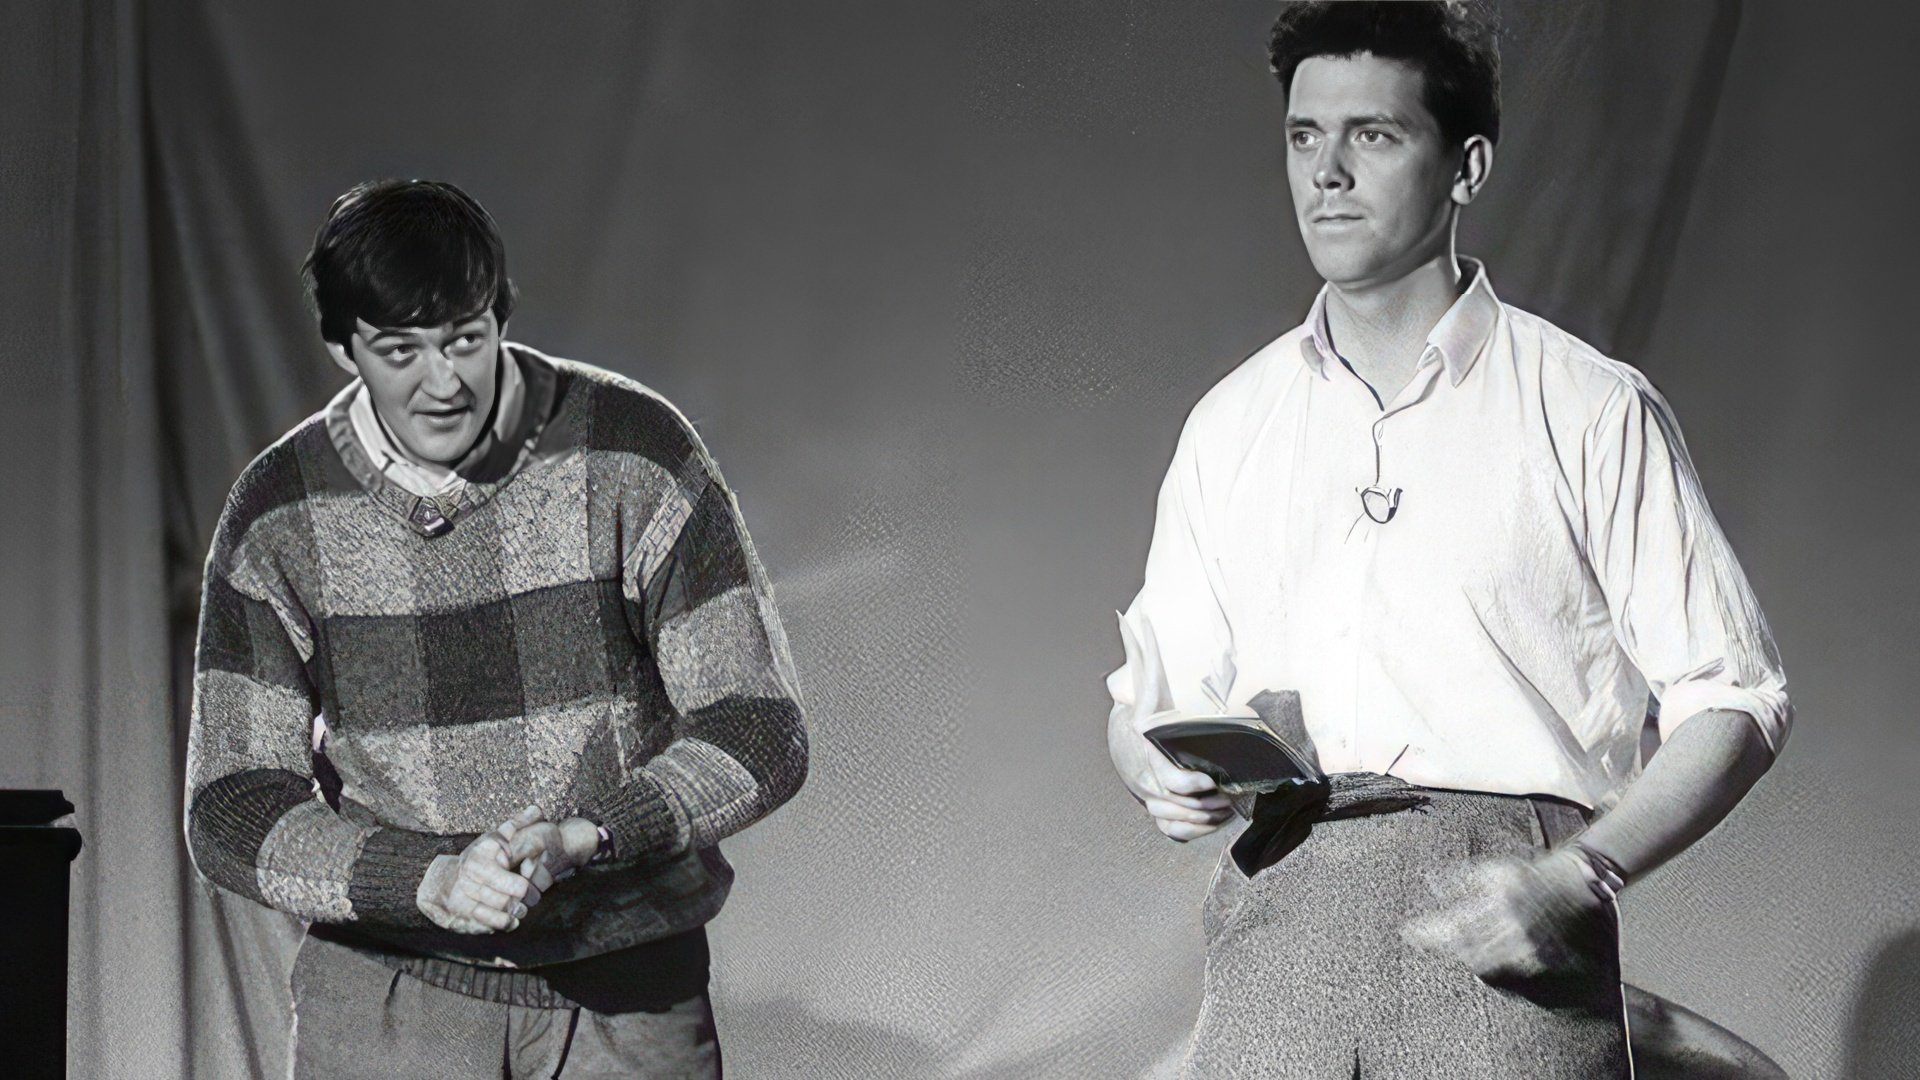 Young Stephen Fry and Hugh Laurie on the stage